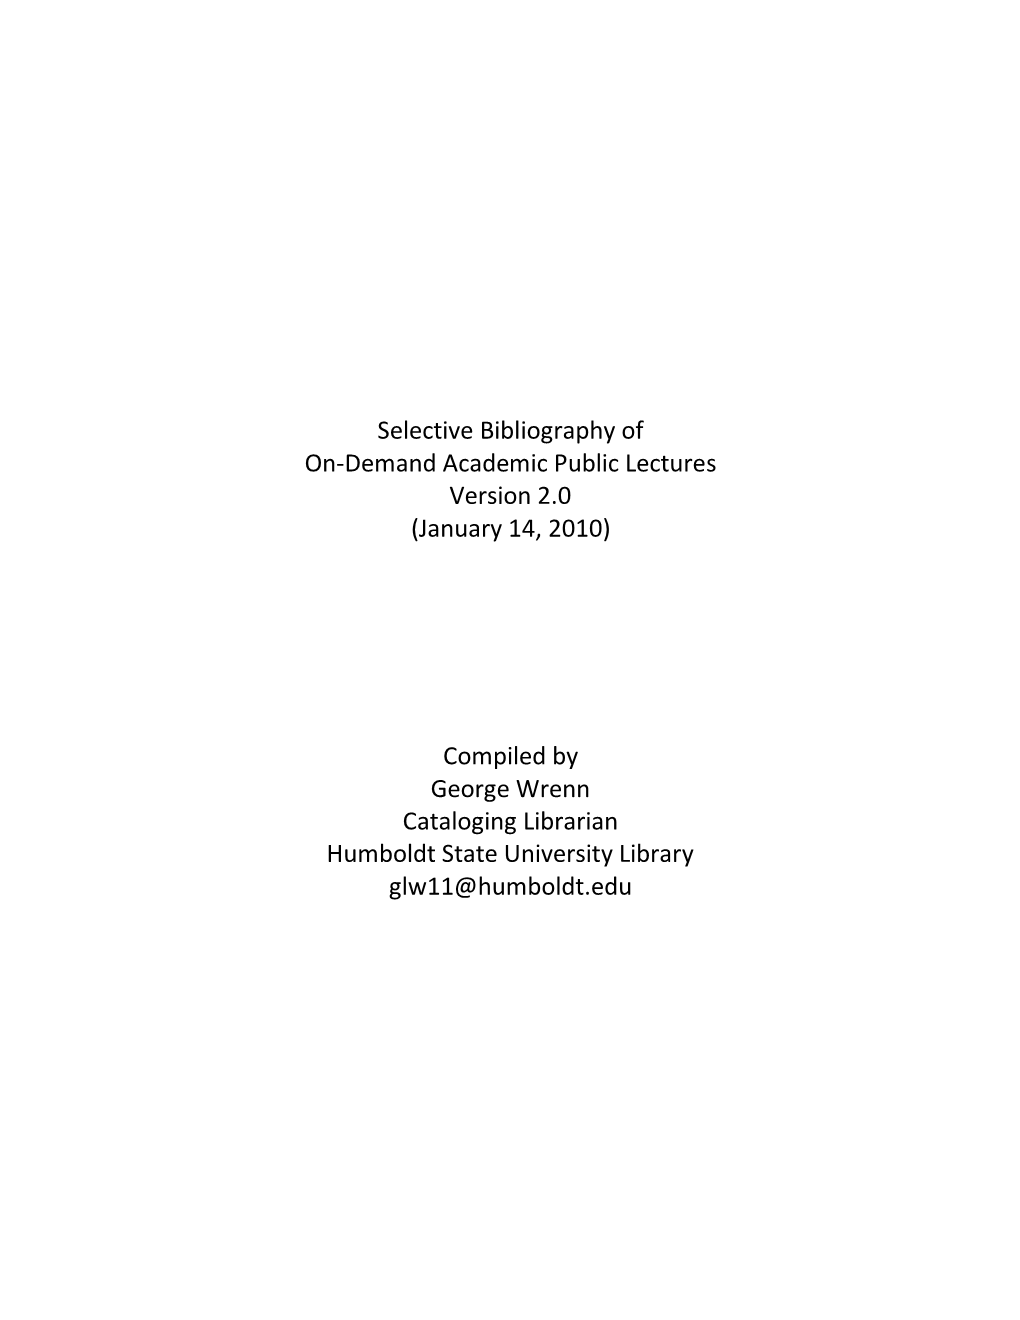 Selected Bibliography of On-Demand Academic Public Lectures